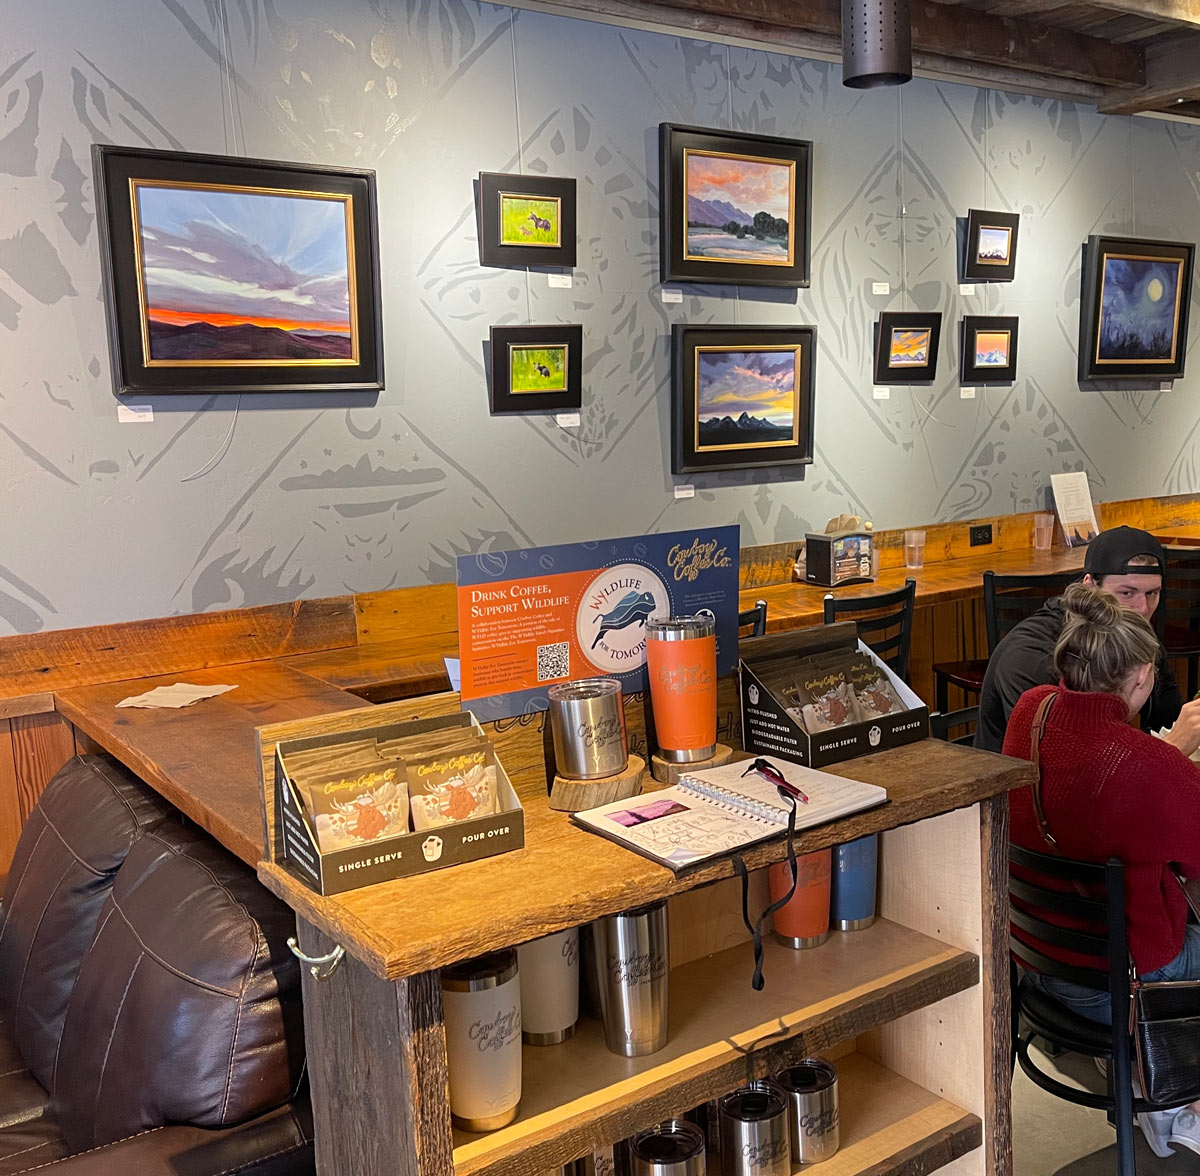 Seating and customers at Cowboy Coffee Town Center